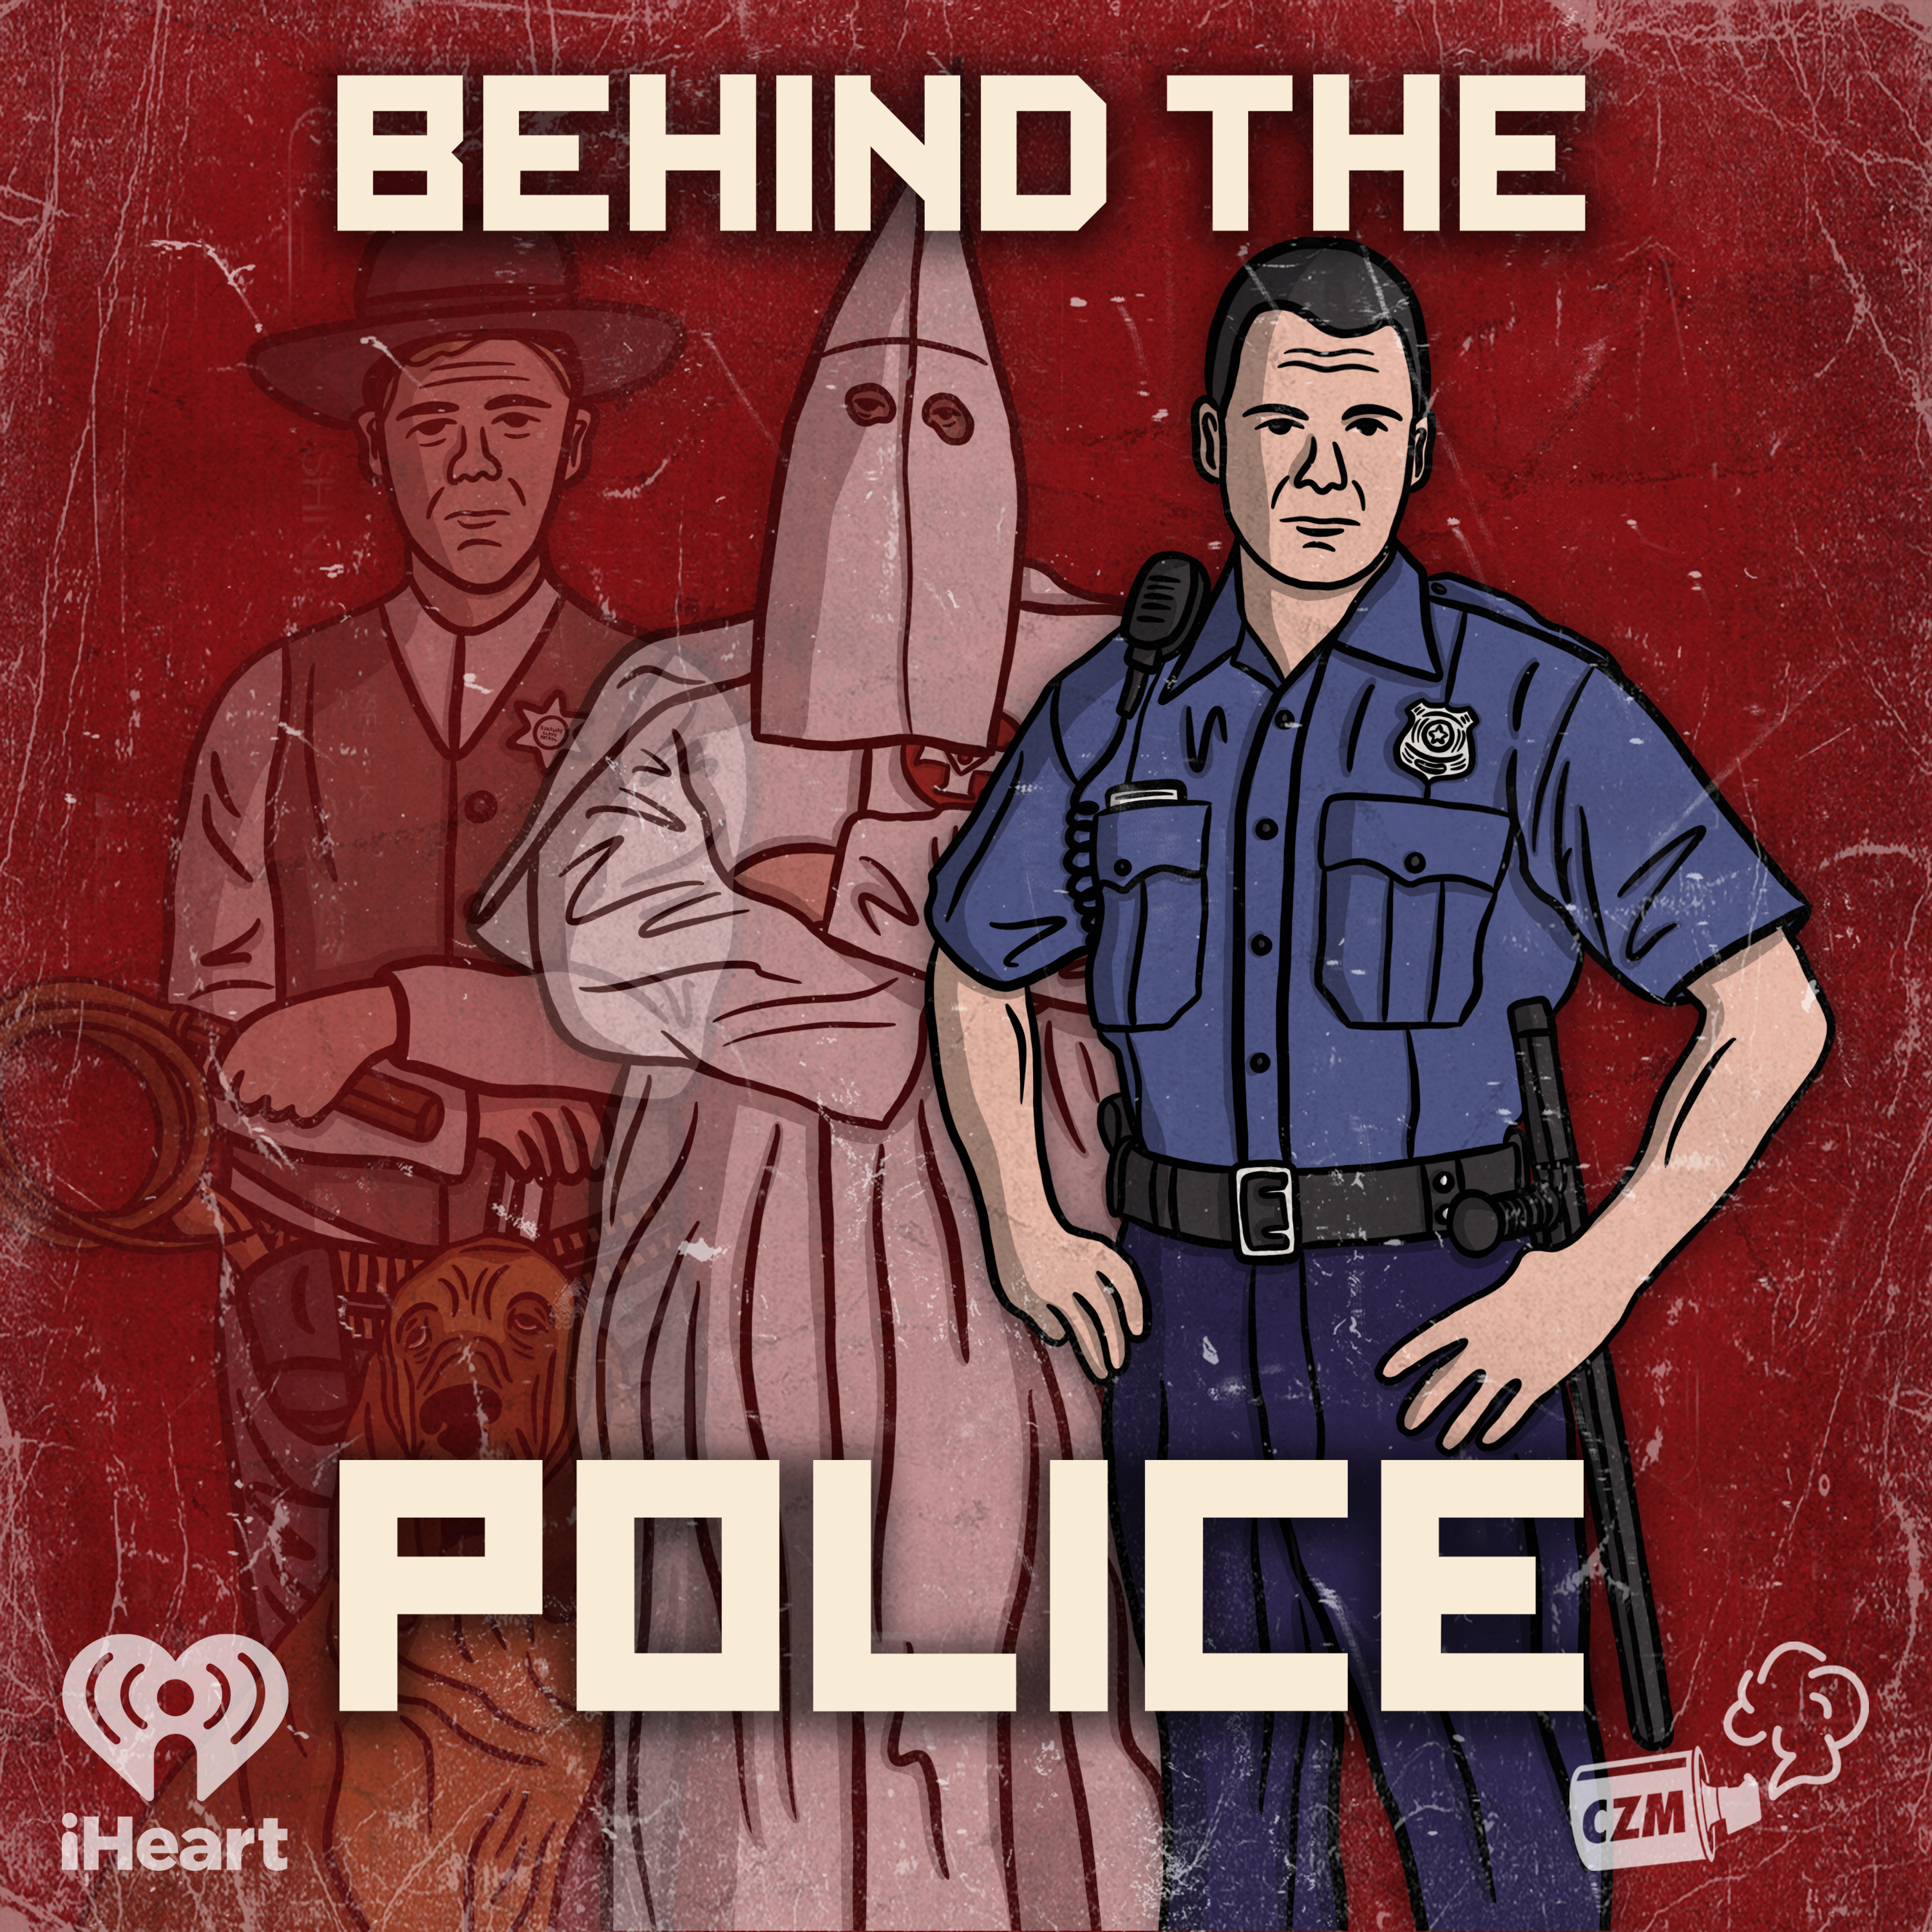 The History of American Police and the Ku Klux Klan